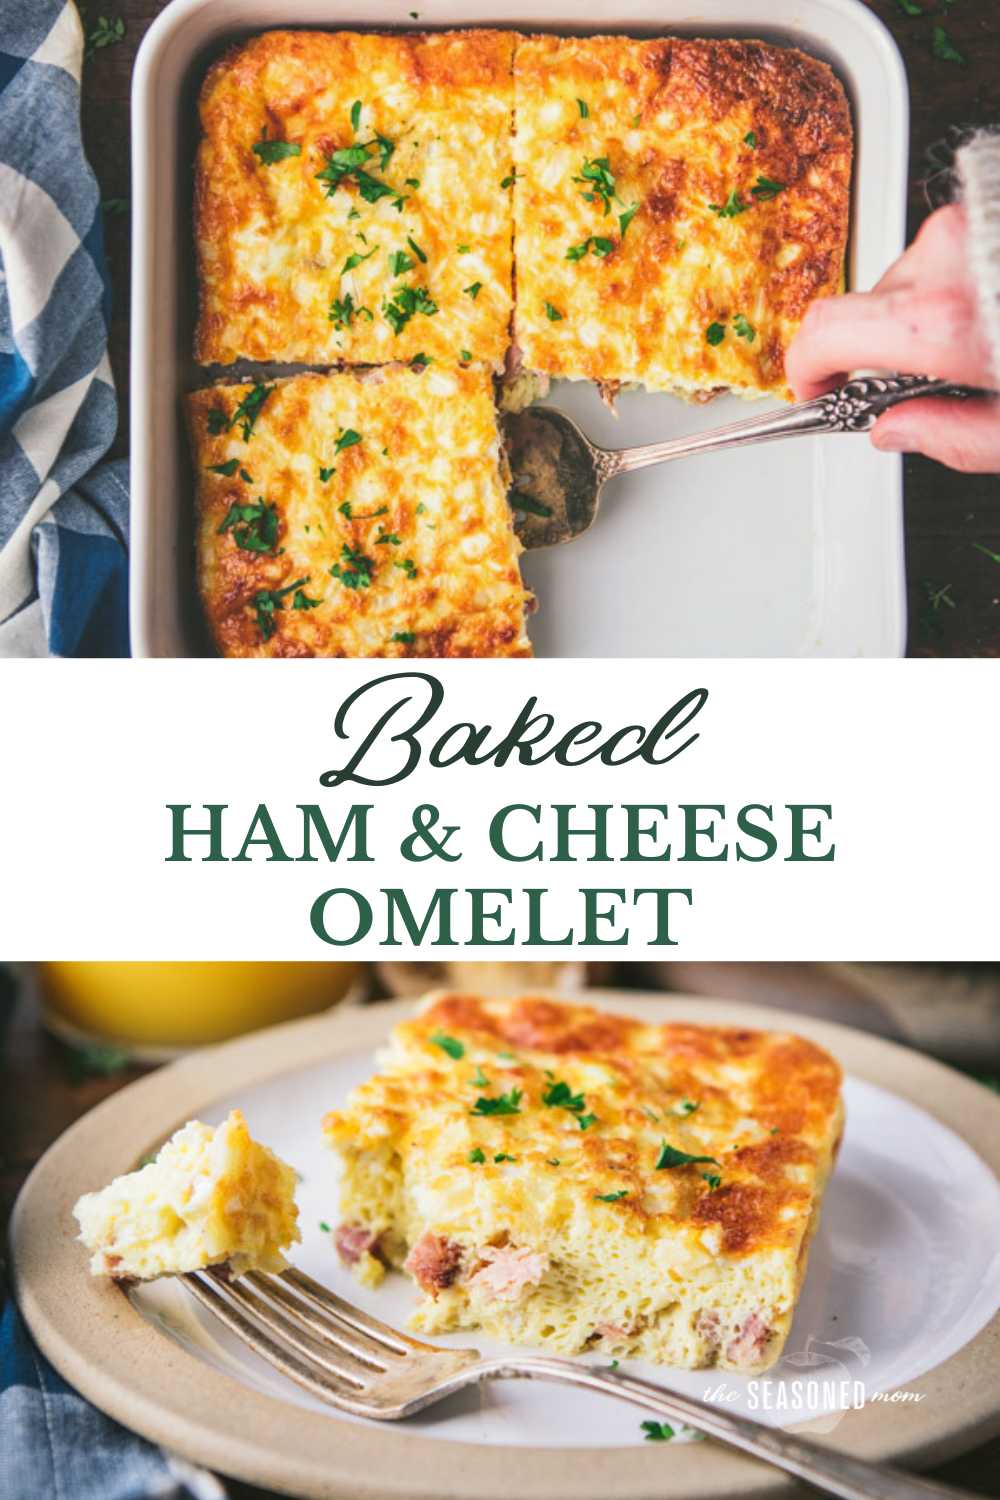 Baked Ham and Cheese Omelet - The Seasoned Mom